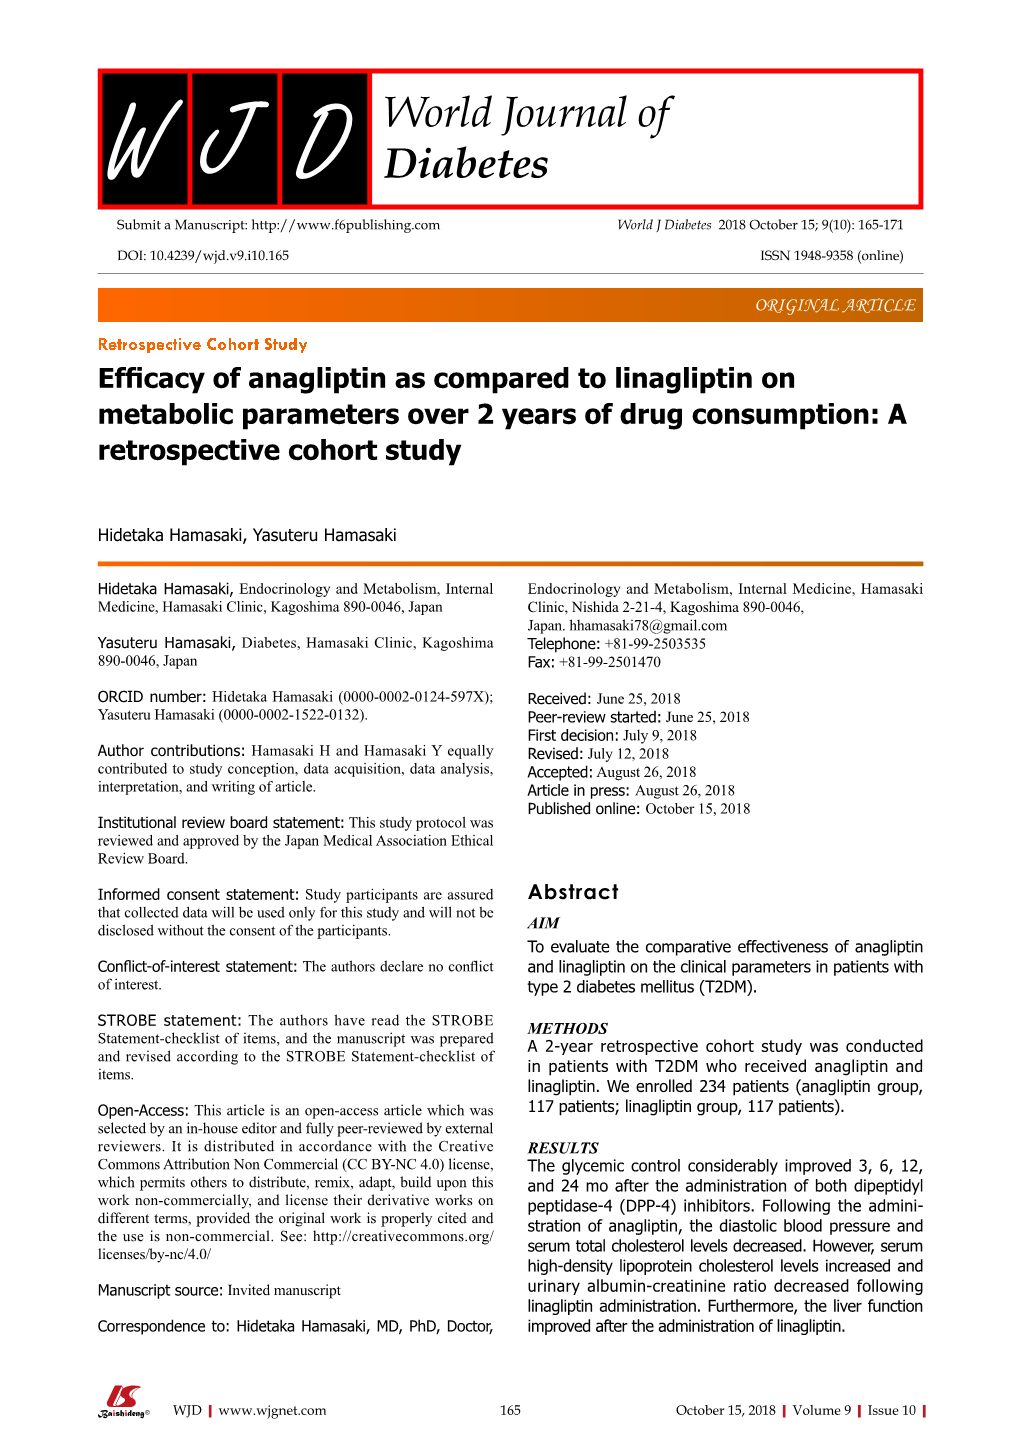 Efficacy of Anagliptin As Compared to Linagliptin on Metabolic Parameters Over 2 Years of Drug Consumption: a Retrospective Cohort Study